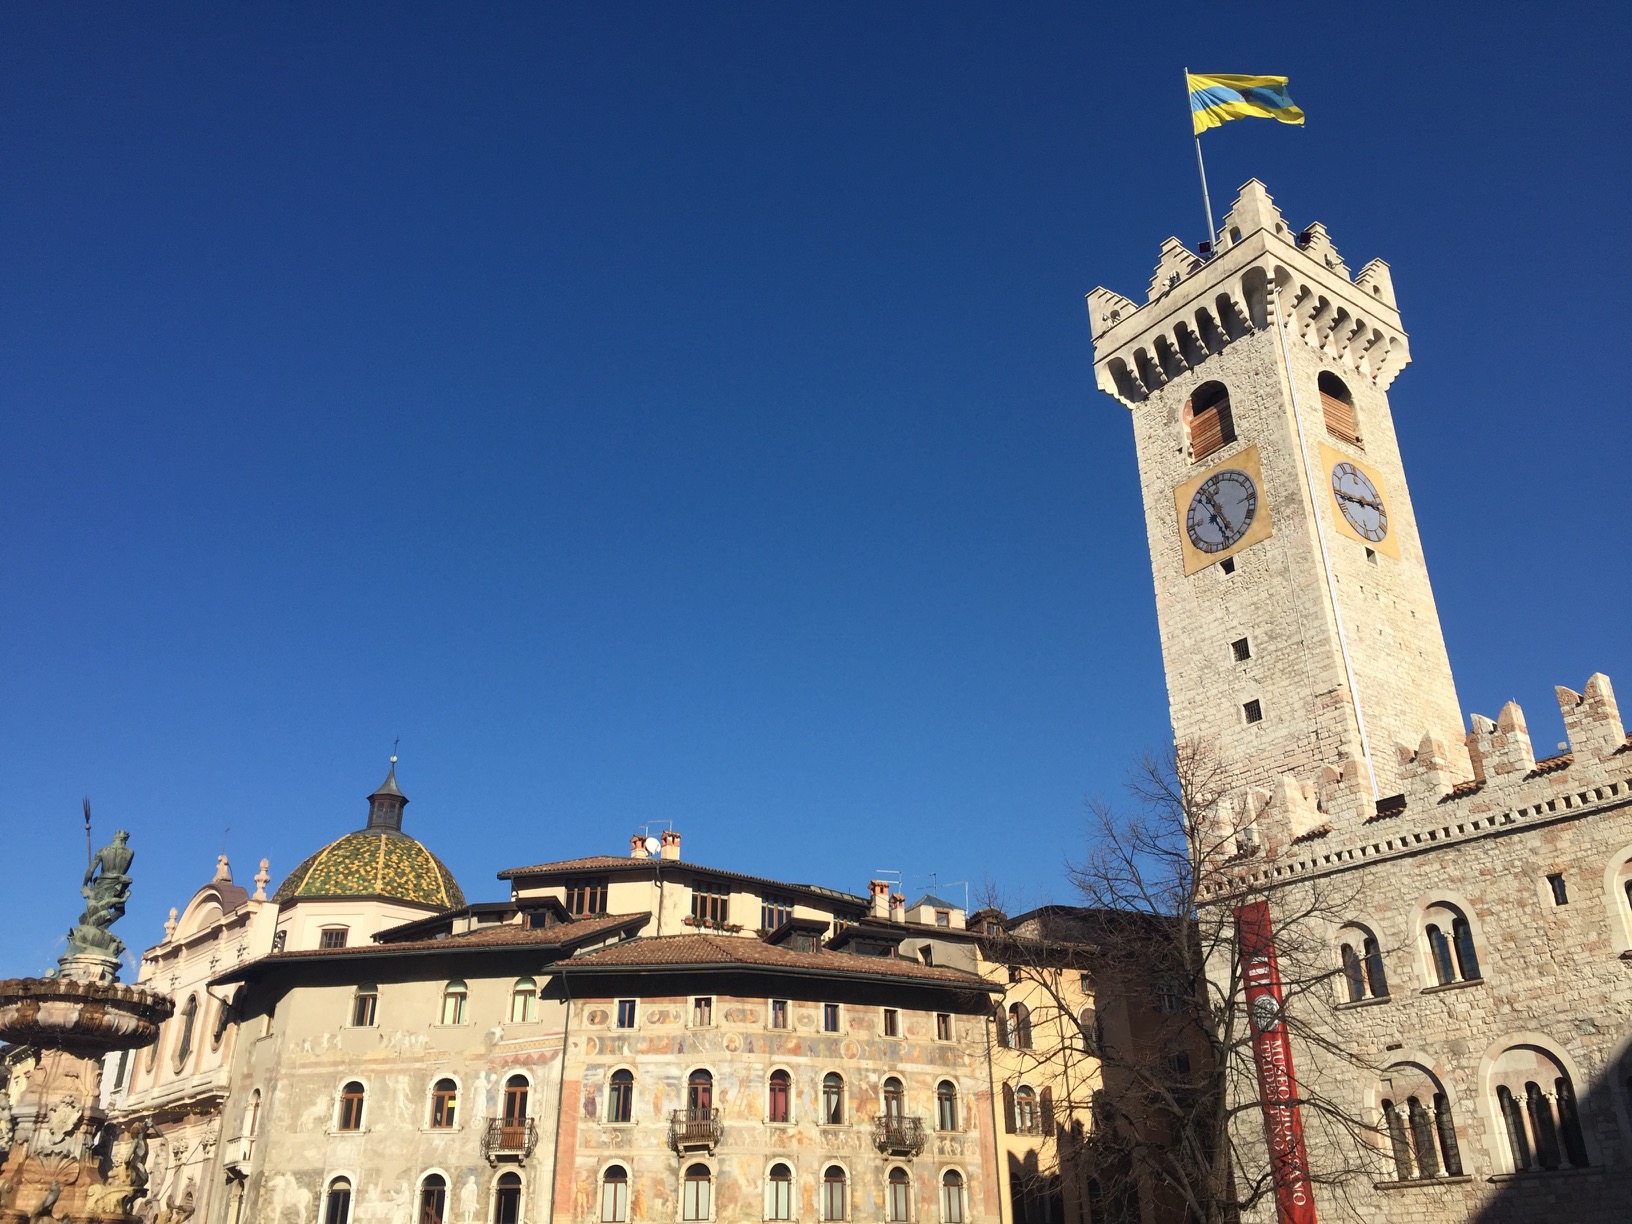 A square clock tower flying the yellow-and-blue flag of of Trento city, with a round tiled tower and fountain of Neptune nearby.